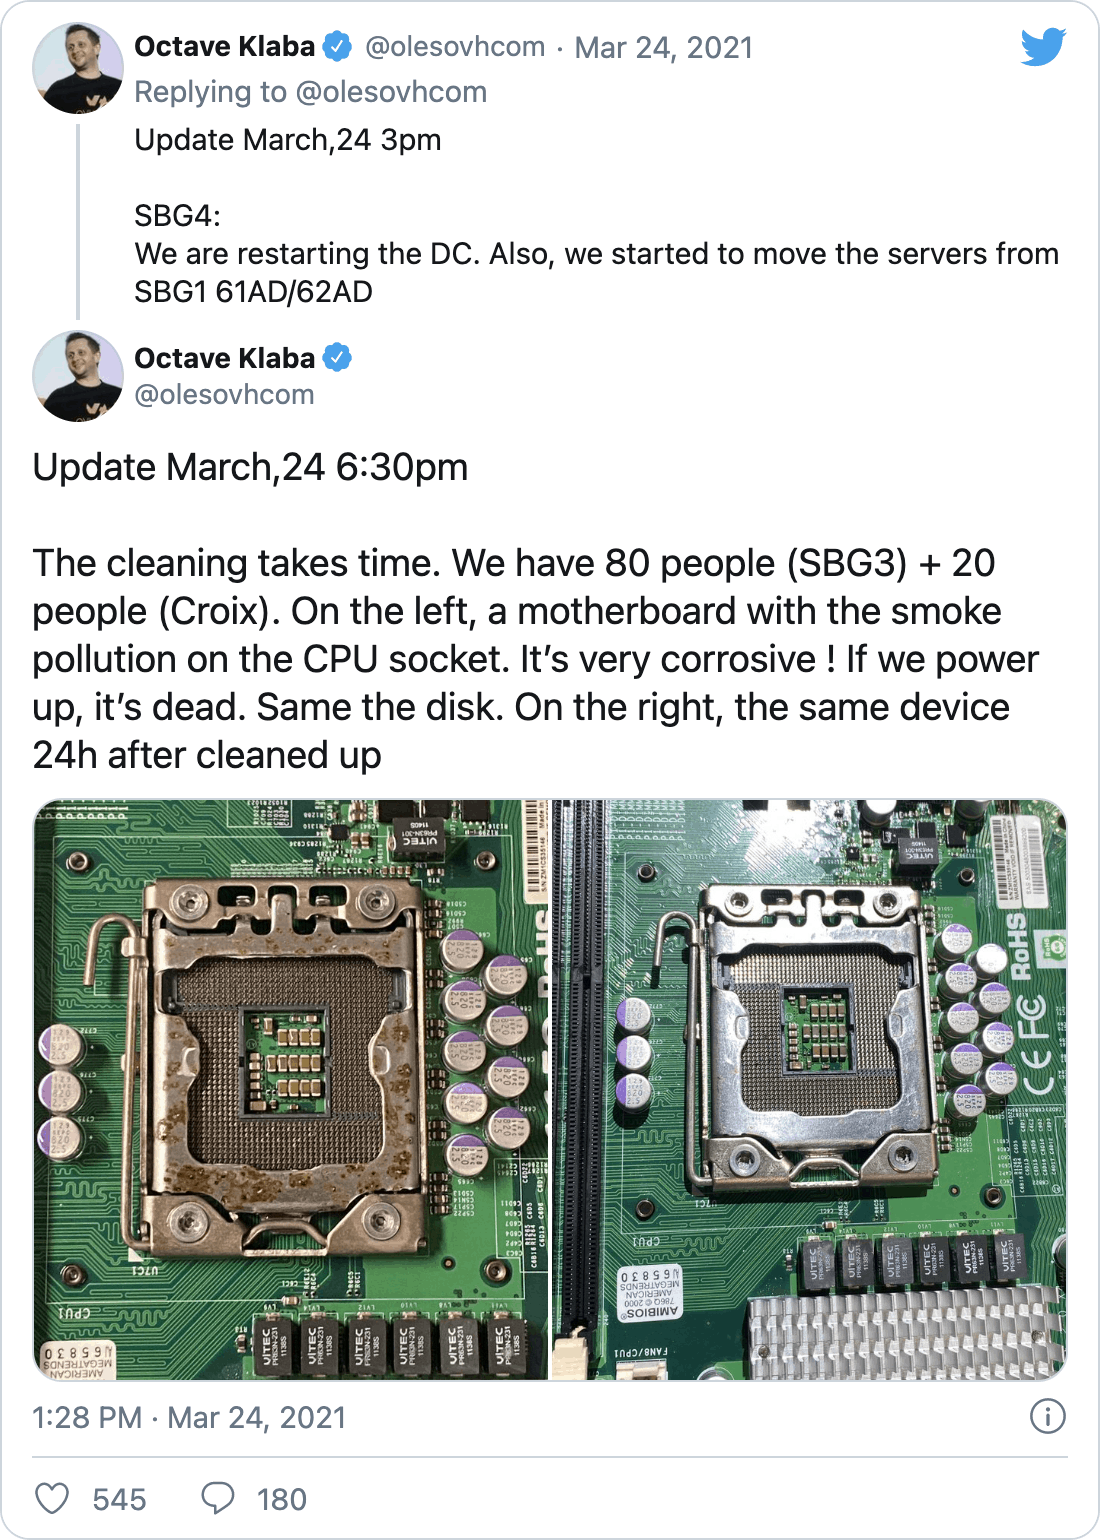 @olesovhcom on Twitter: &ldquo;Update March,24 6:30pm The cleaning takes time. We have 80 people (SBG3) + 20 people (Croix). On the left, a motherboard with the smoke pollution on the CPU socket. It’s very corrosive ! If we power up, it’s dead. Same the disk. On the right, the same device 24h after cleaned up&rdquo;